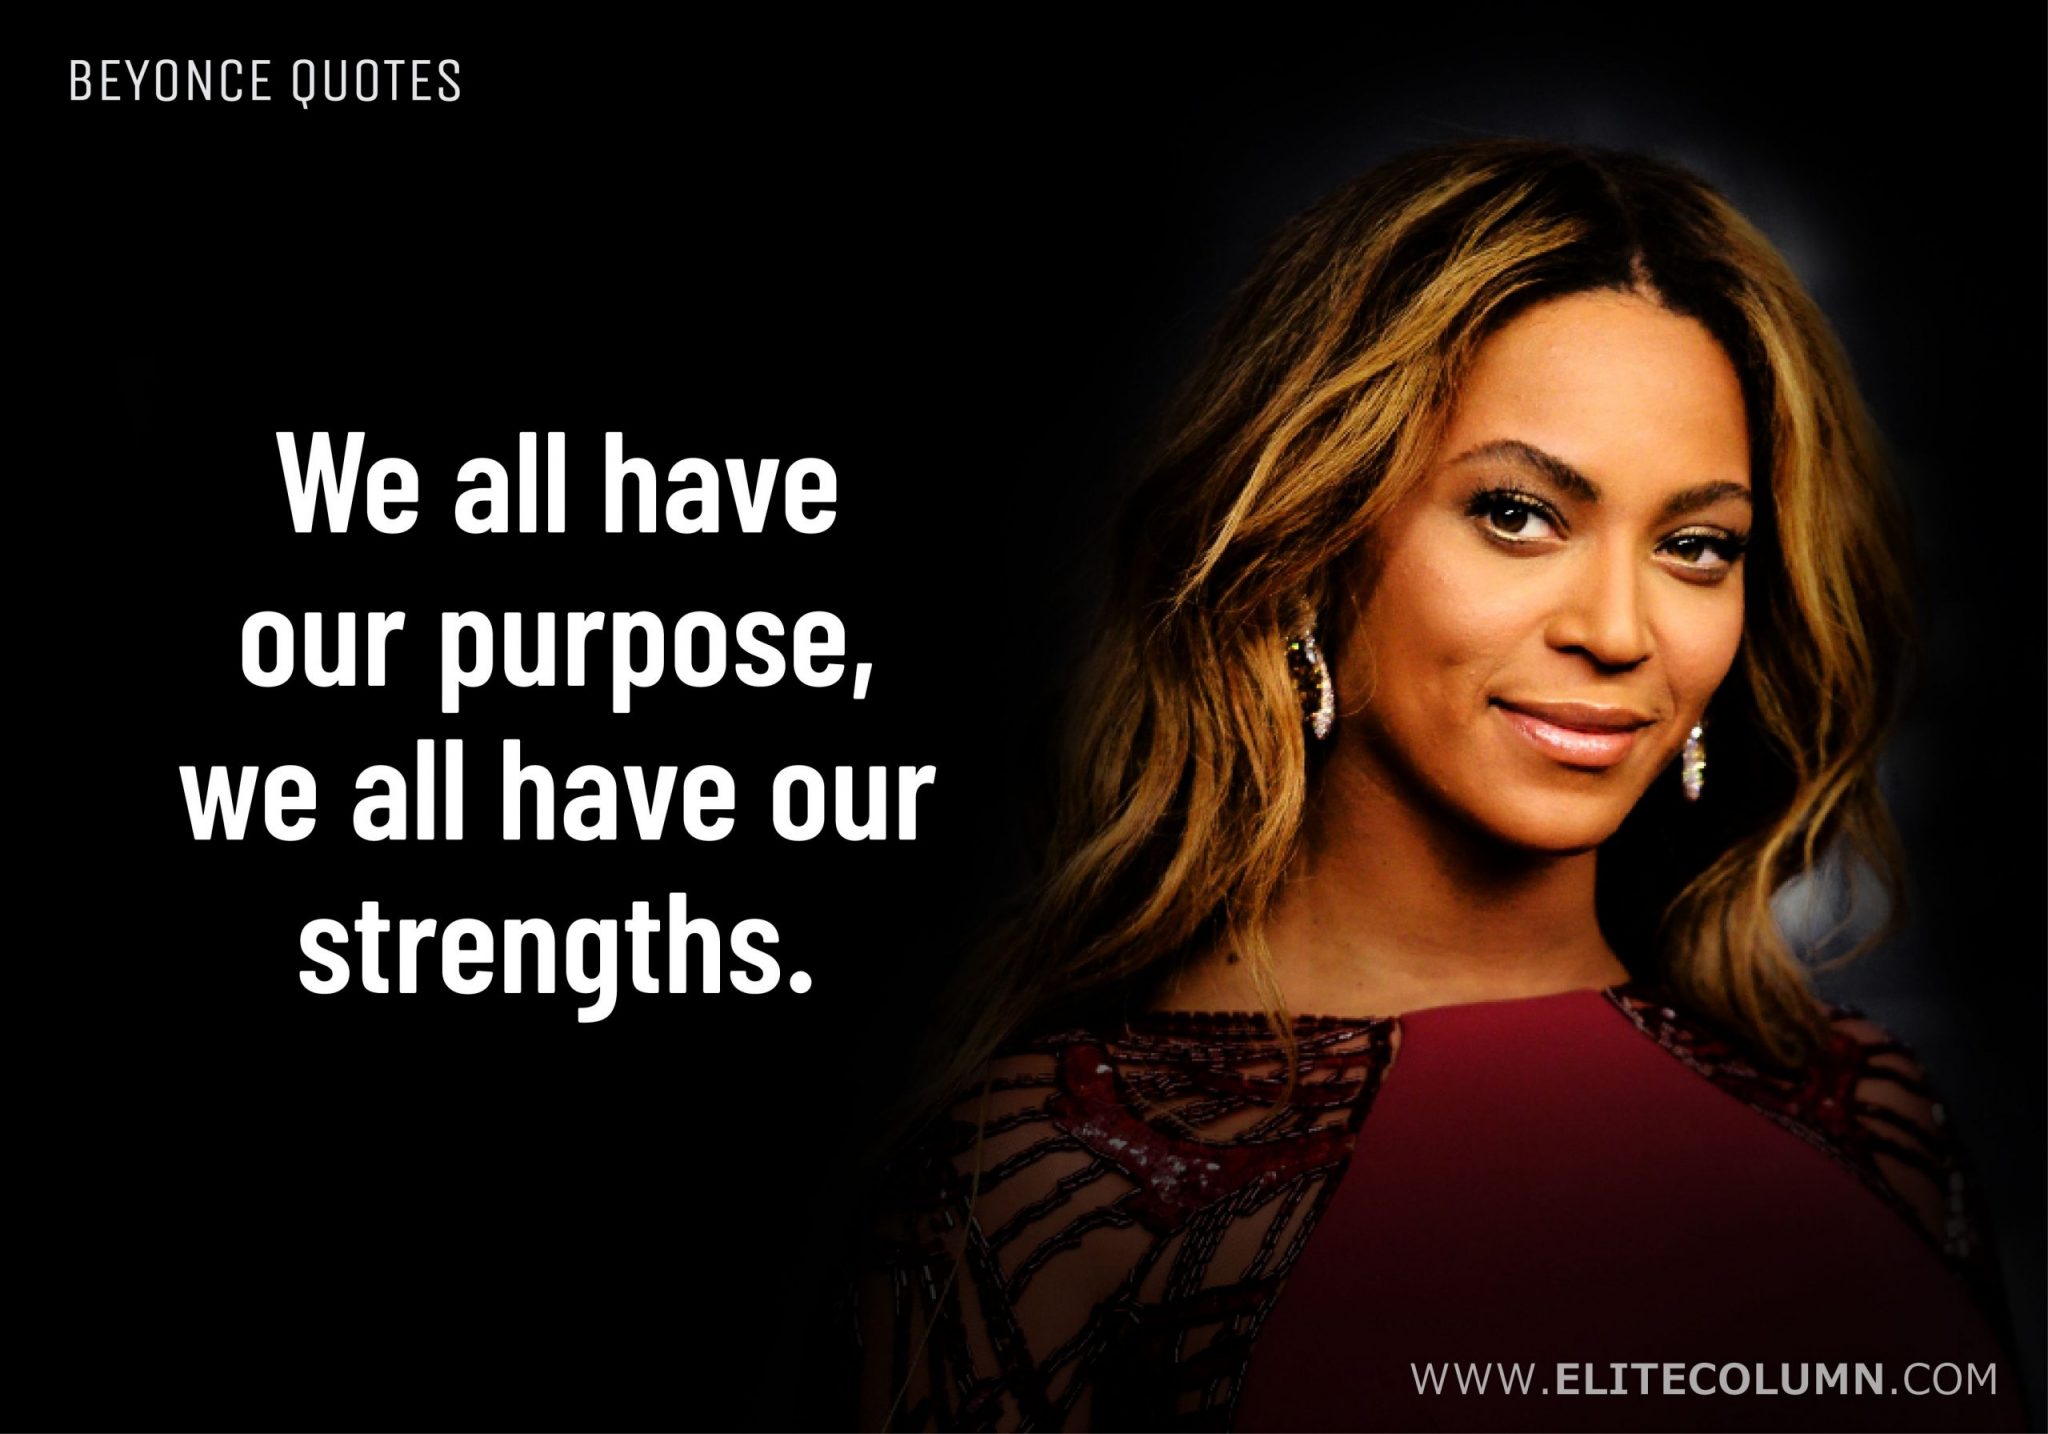 Beyonce Quotes About Women